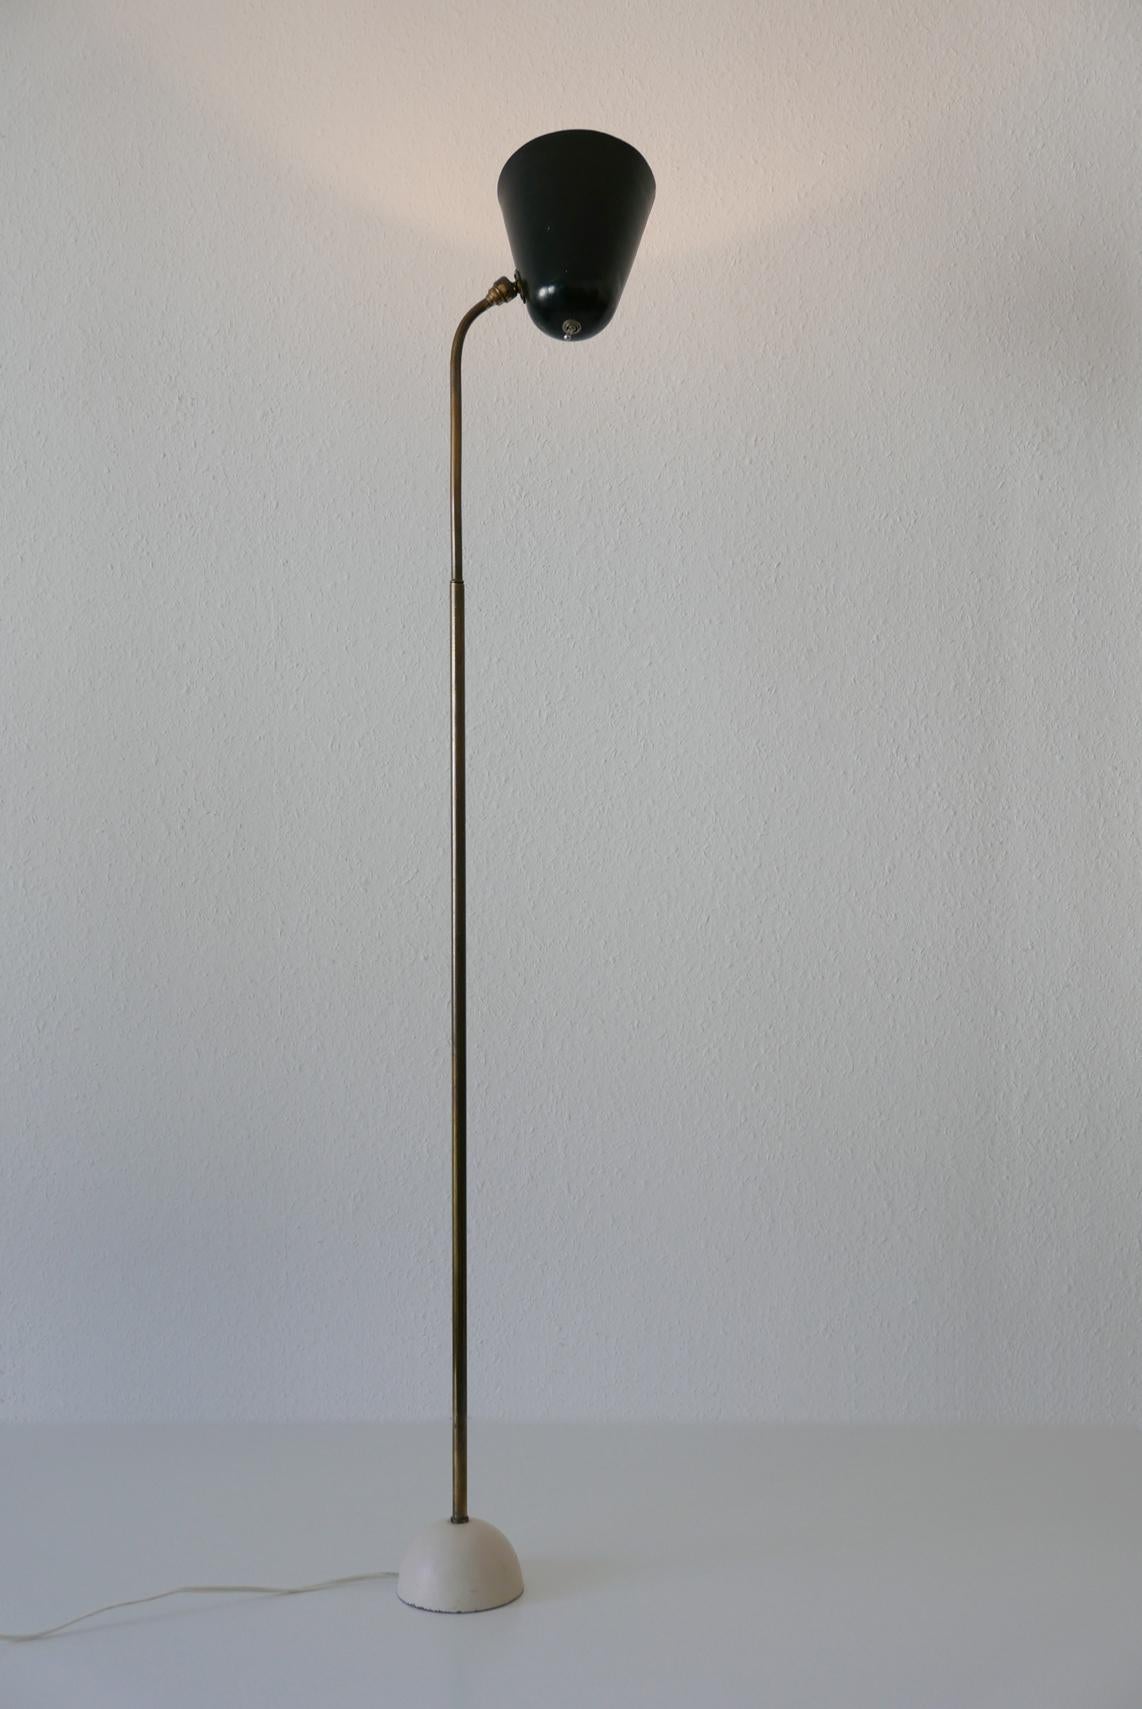 Extremely rare and elegant Mid-Century Modern floor lamp. Designed and manufactured in 1950s, Germany. 
Due to joint ball, lamp shade can be directed in every position. Adjustable height.

Executed in brass, aluminium and cast metal. The lamp needs